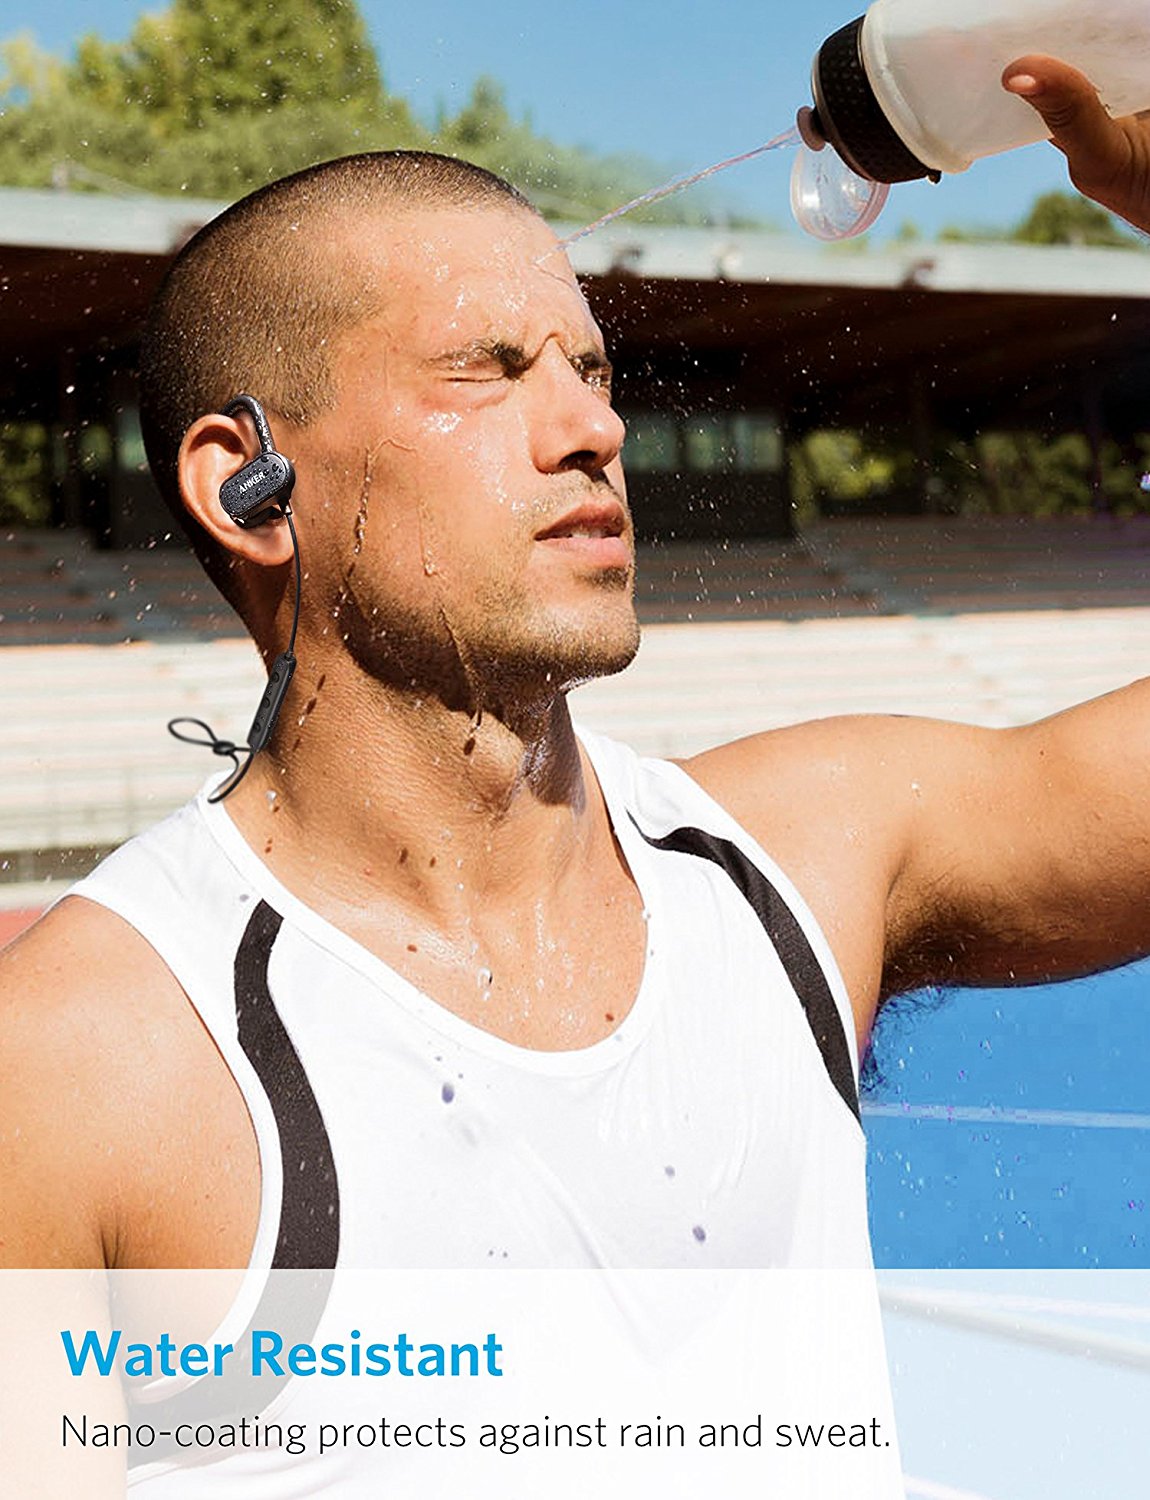 Anker &#039;SoundBuds Curve&#039; Wireless and Waterproof Headphones On Sale for 25% Off [Deal]